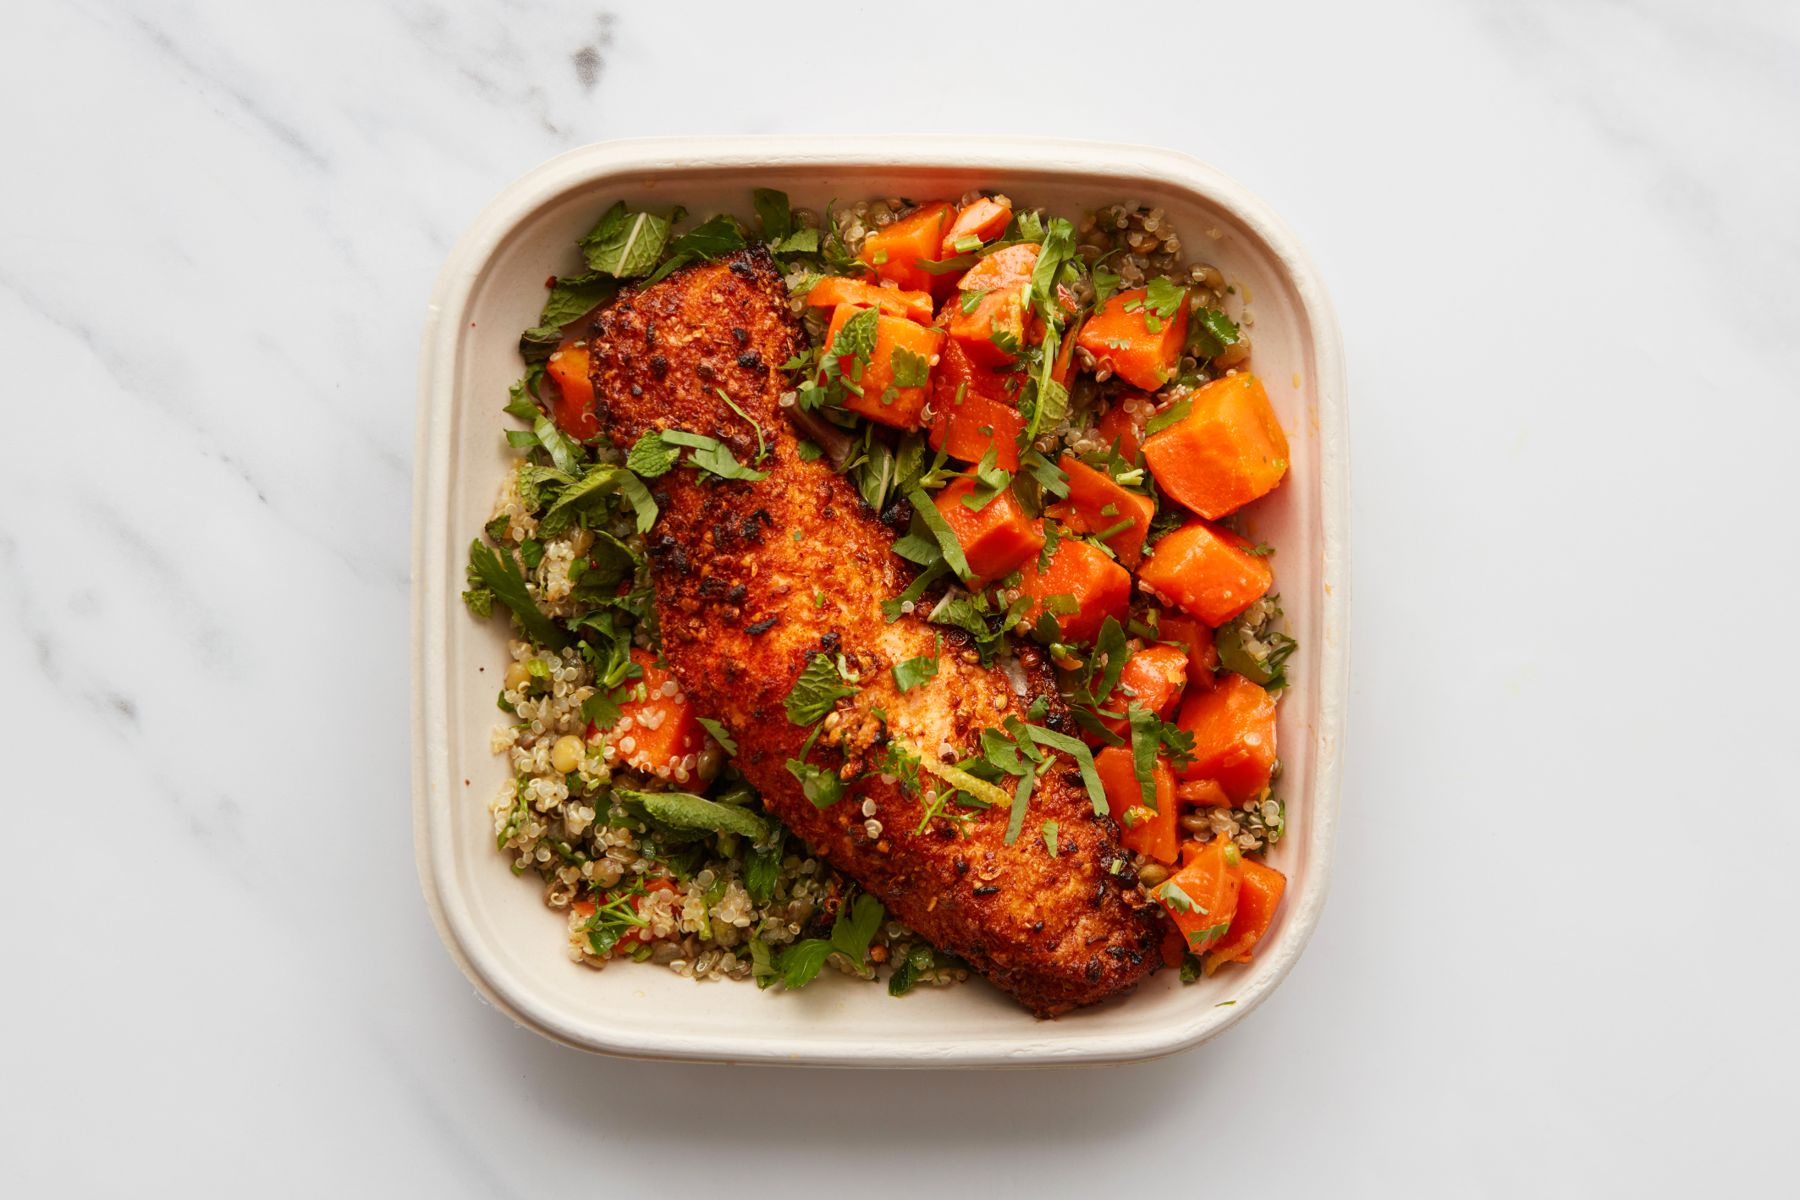 Lions prep -  Hazelnut Dukkah Crusted Salmon with Moroccan Sauce, Herby Quinoa, Carrot & Lentil Tabbouleh